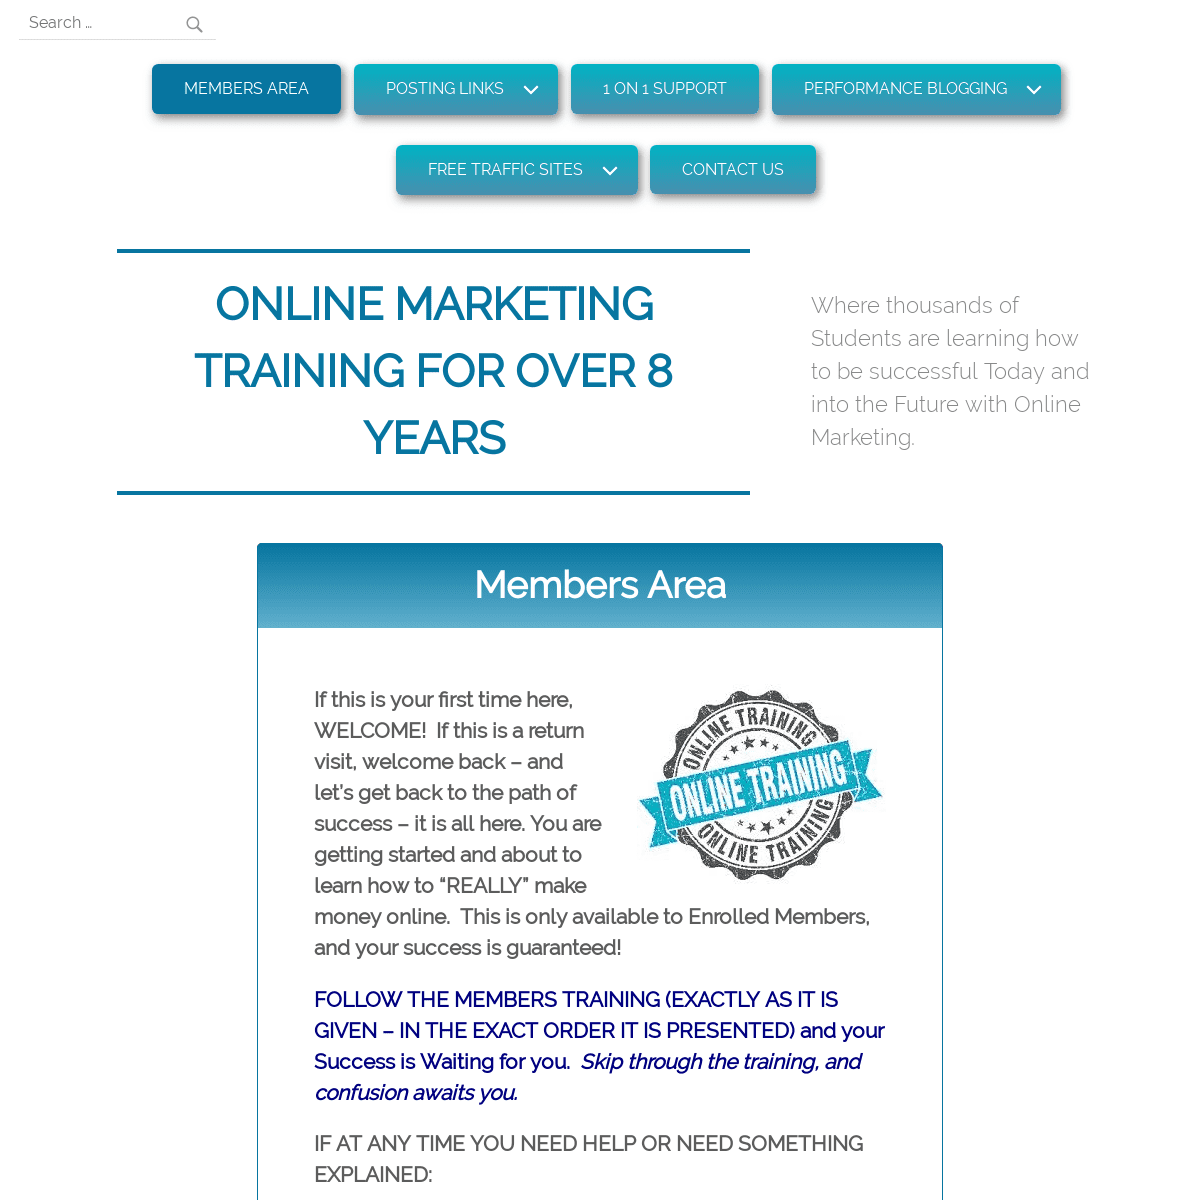 Online Marketing Training for Over 8 years – Where thousands of Students are learning how to be successful Today and into the Fu